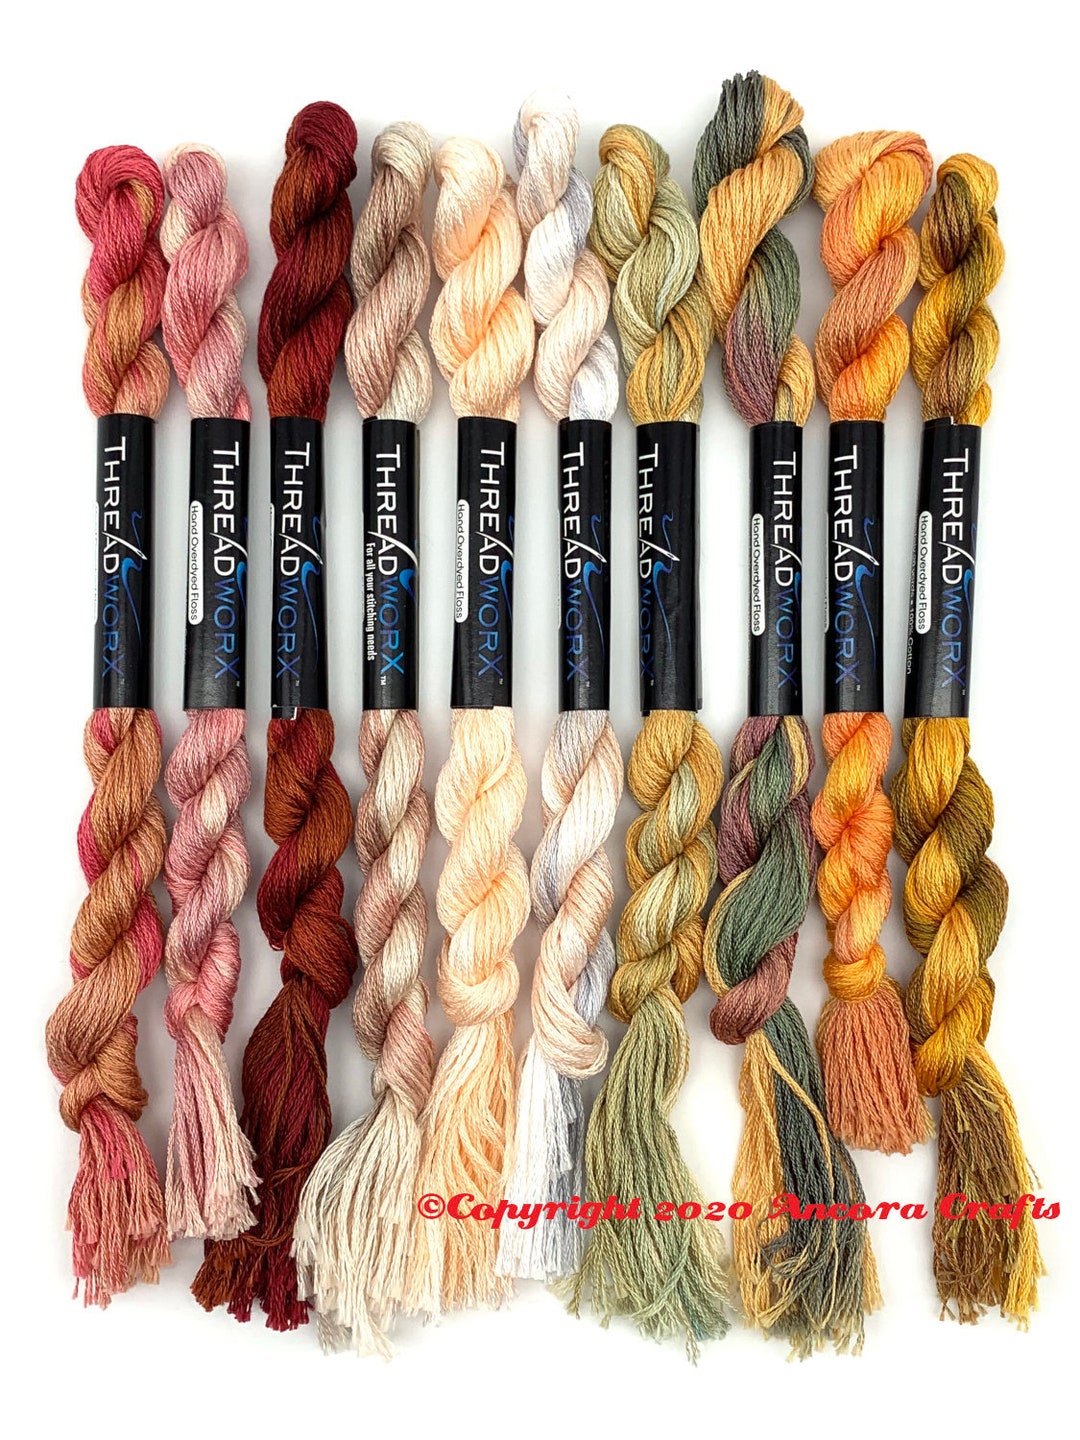 DMC 53 Variegated Steel Gray - 6 Strand Embroidery Floss